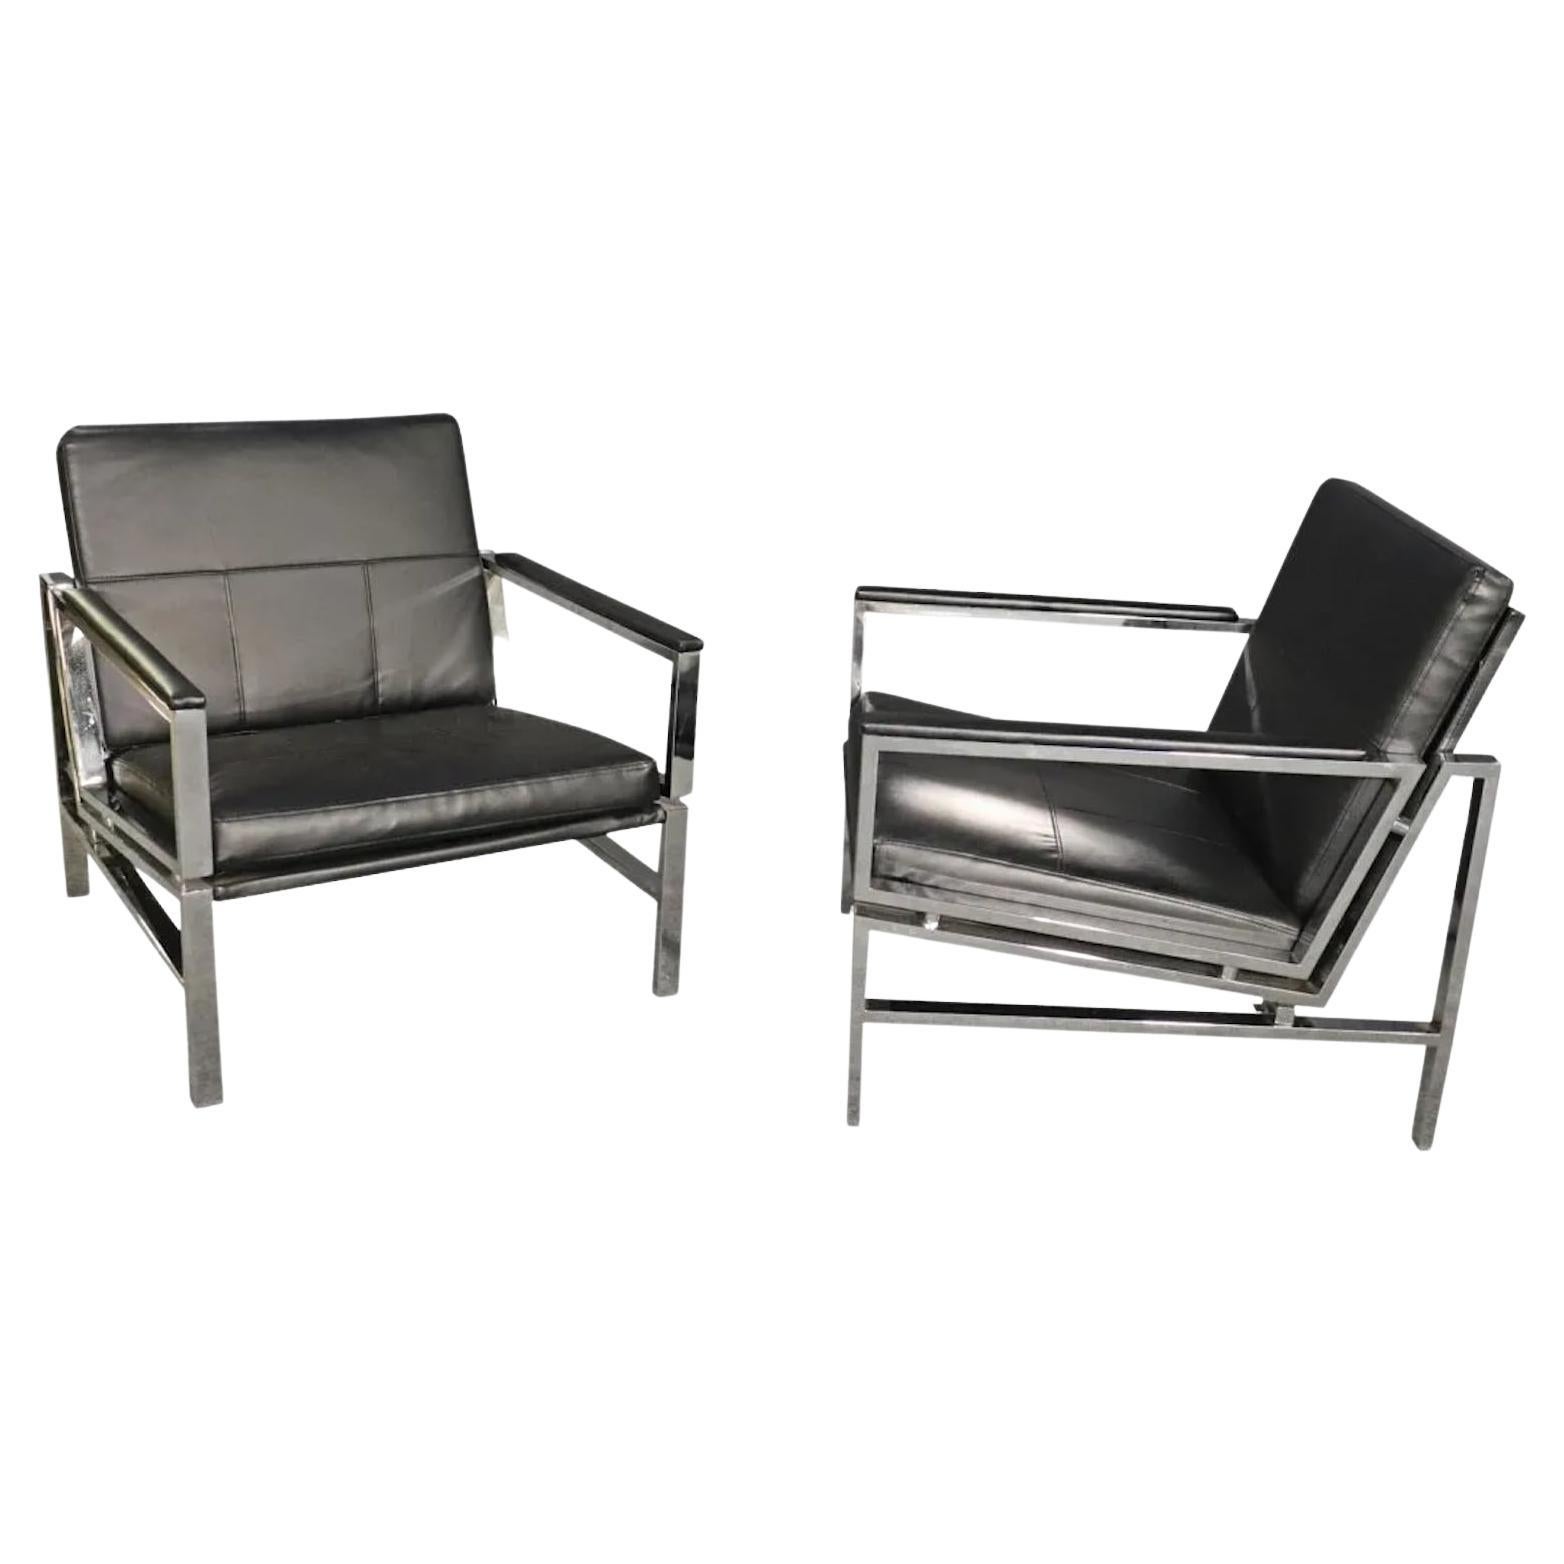 Pair Mid-Century Style Chrome Chairs